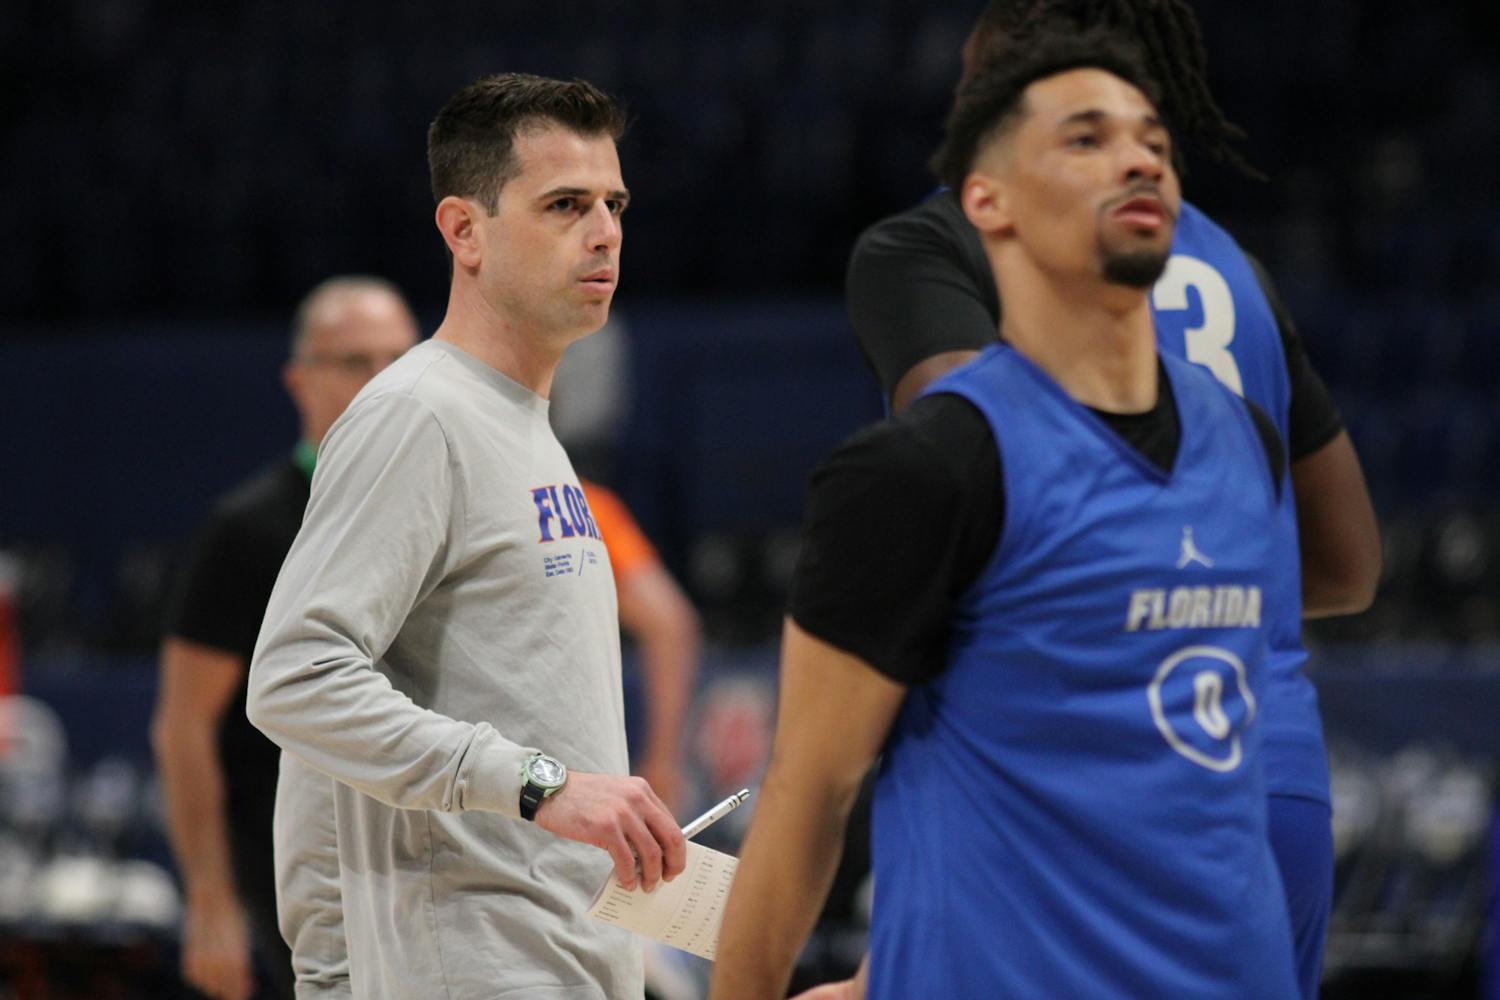 Florida head coach Todd Golden coaches the Gators' men's basketball team during a practice the day before its Southeastern Conference tournament game Wednesday, March 8, 2023.